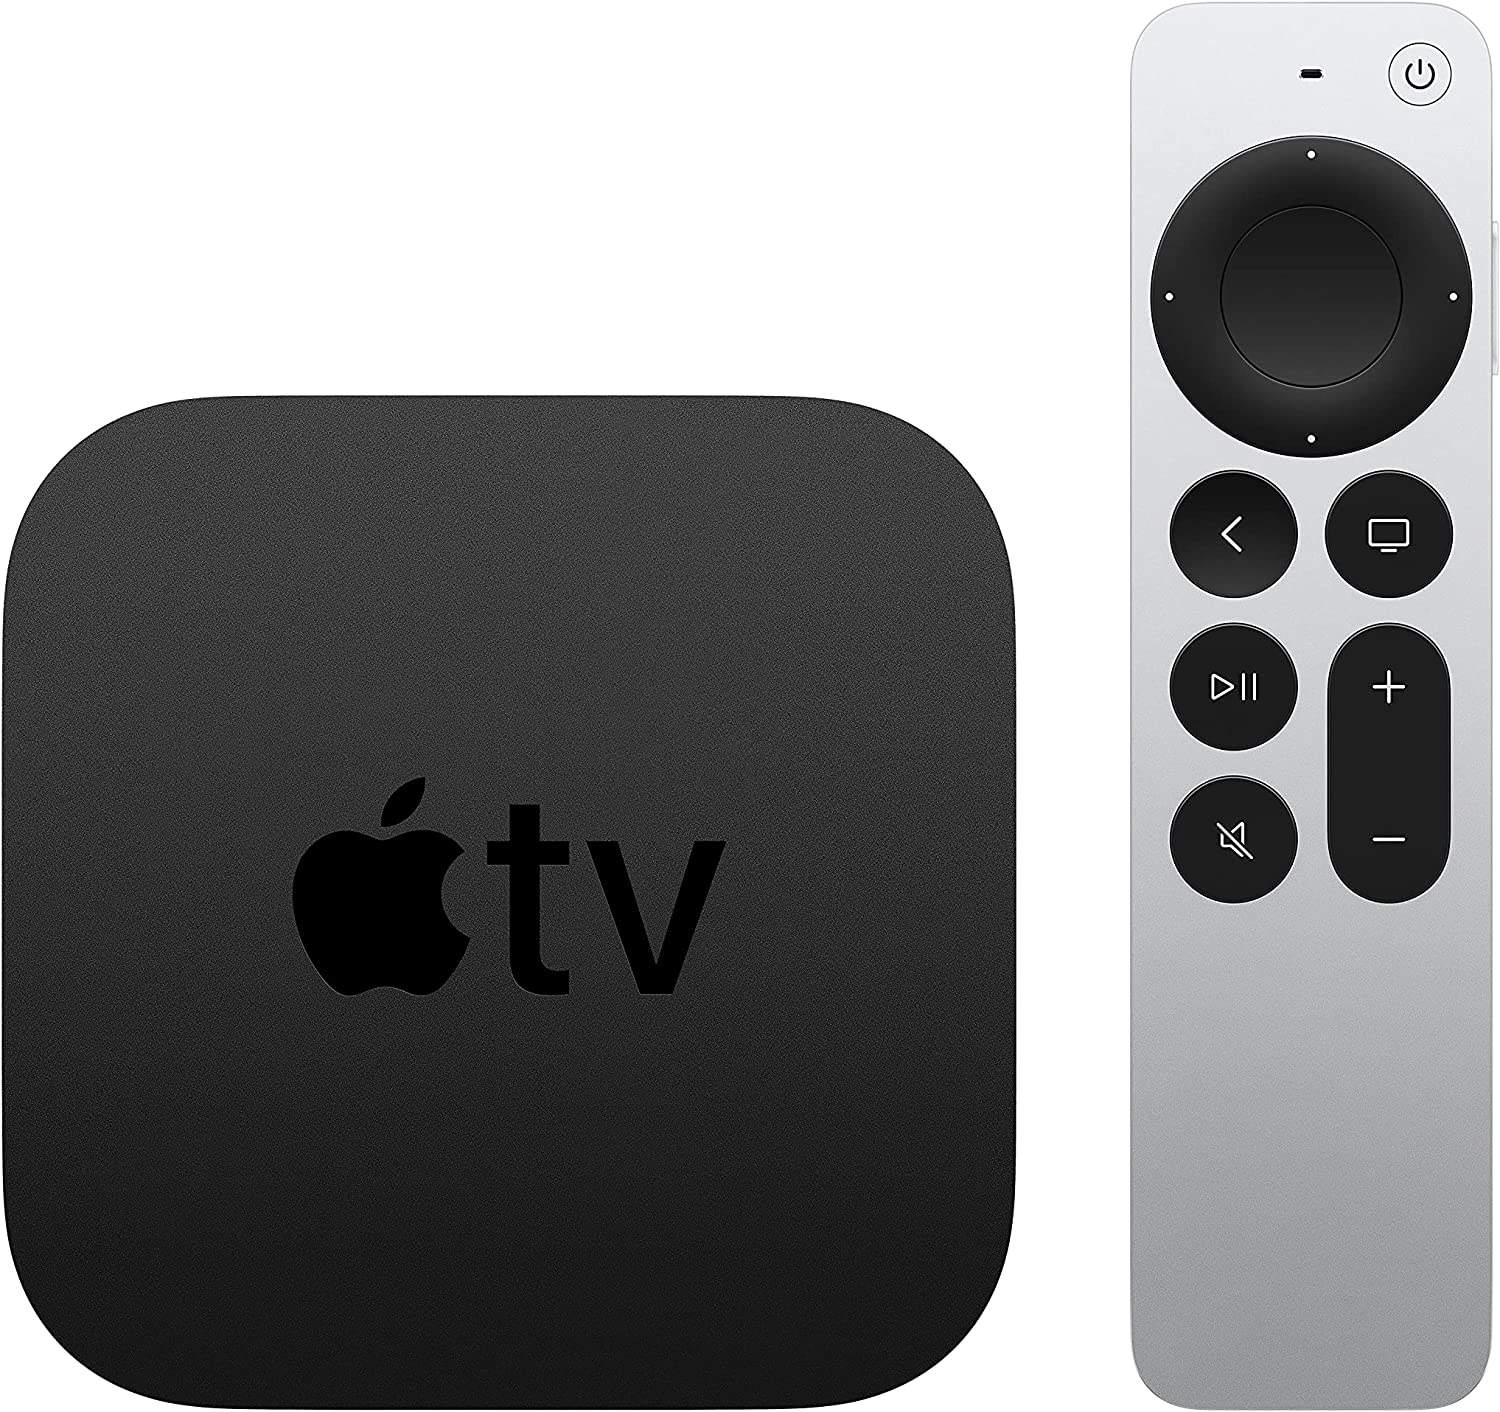 Apple TV 4K(2021) and remote